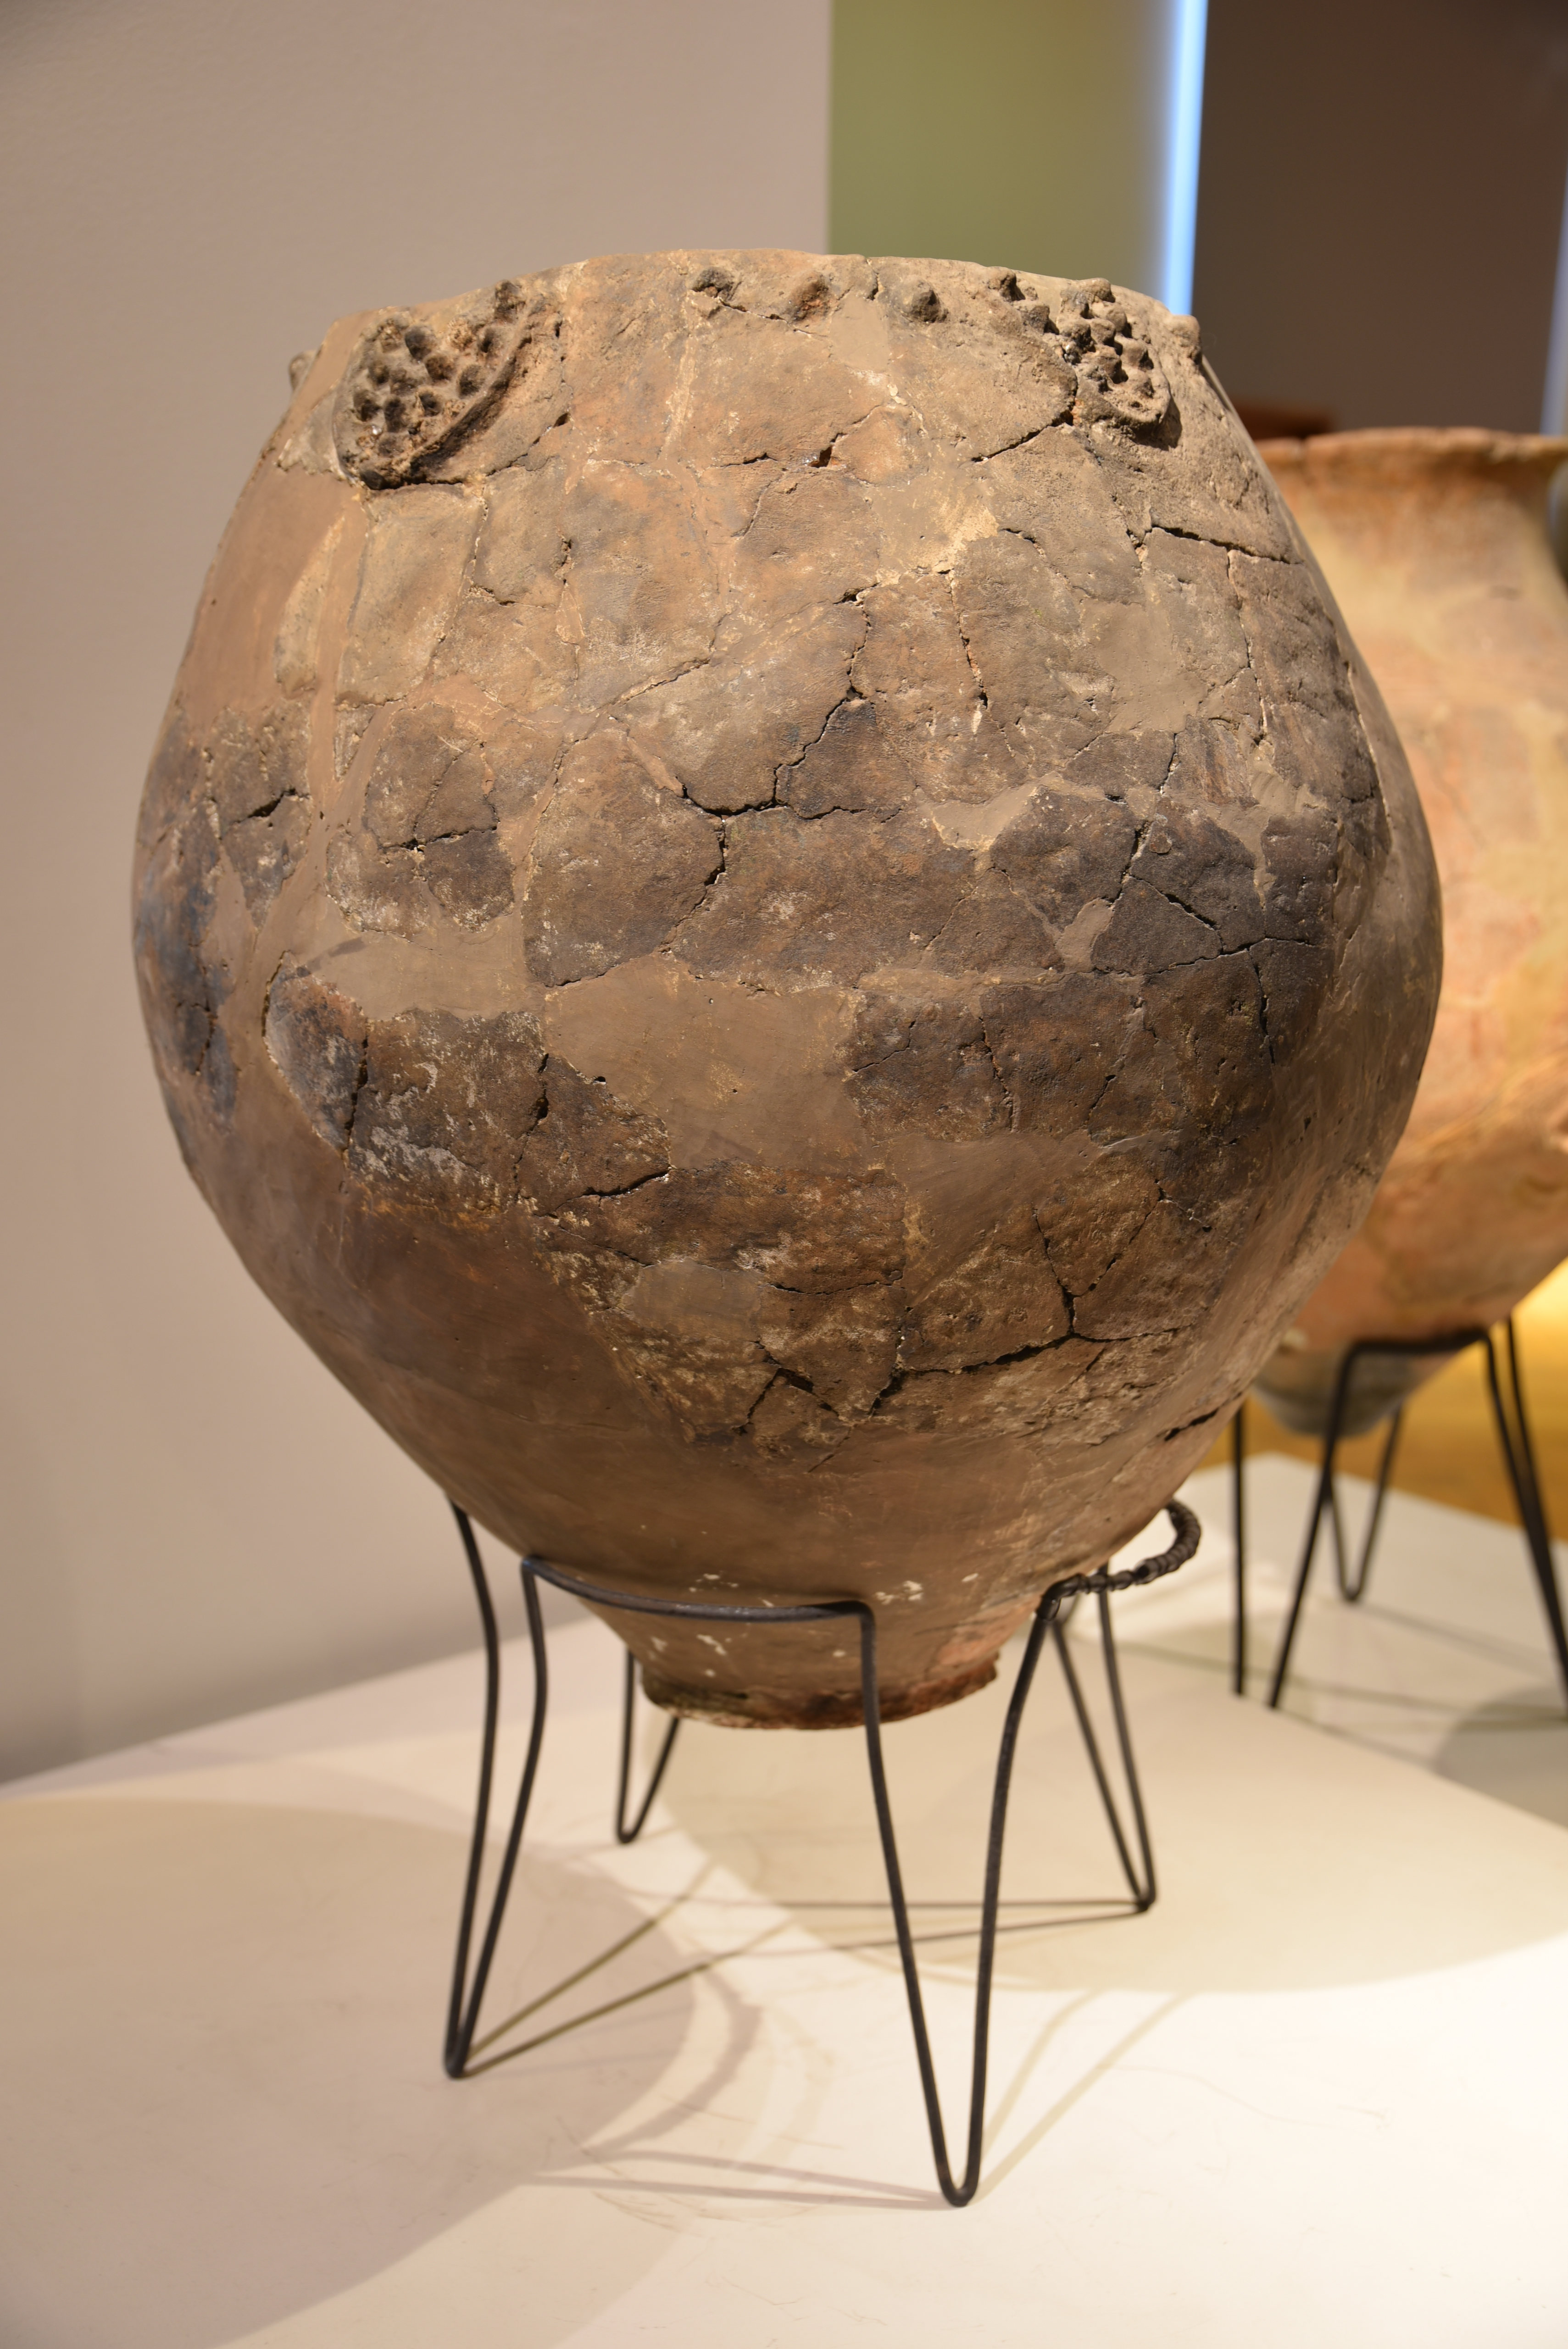 Large, ancient ceramic pot with cracks and restoration, displayed on a metal stand, embodying how humans transform the earth.